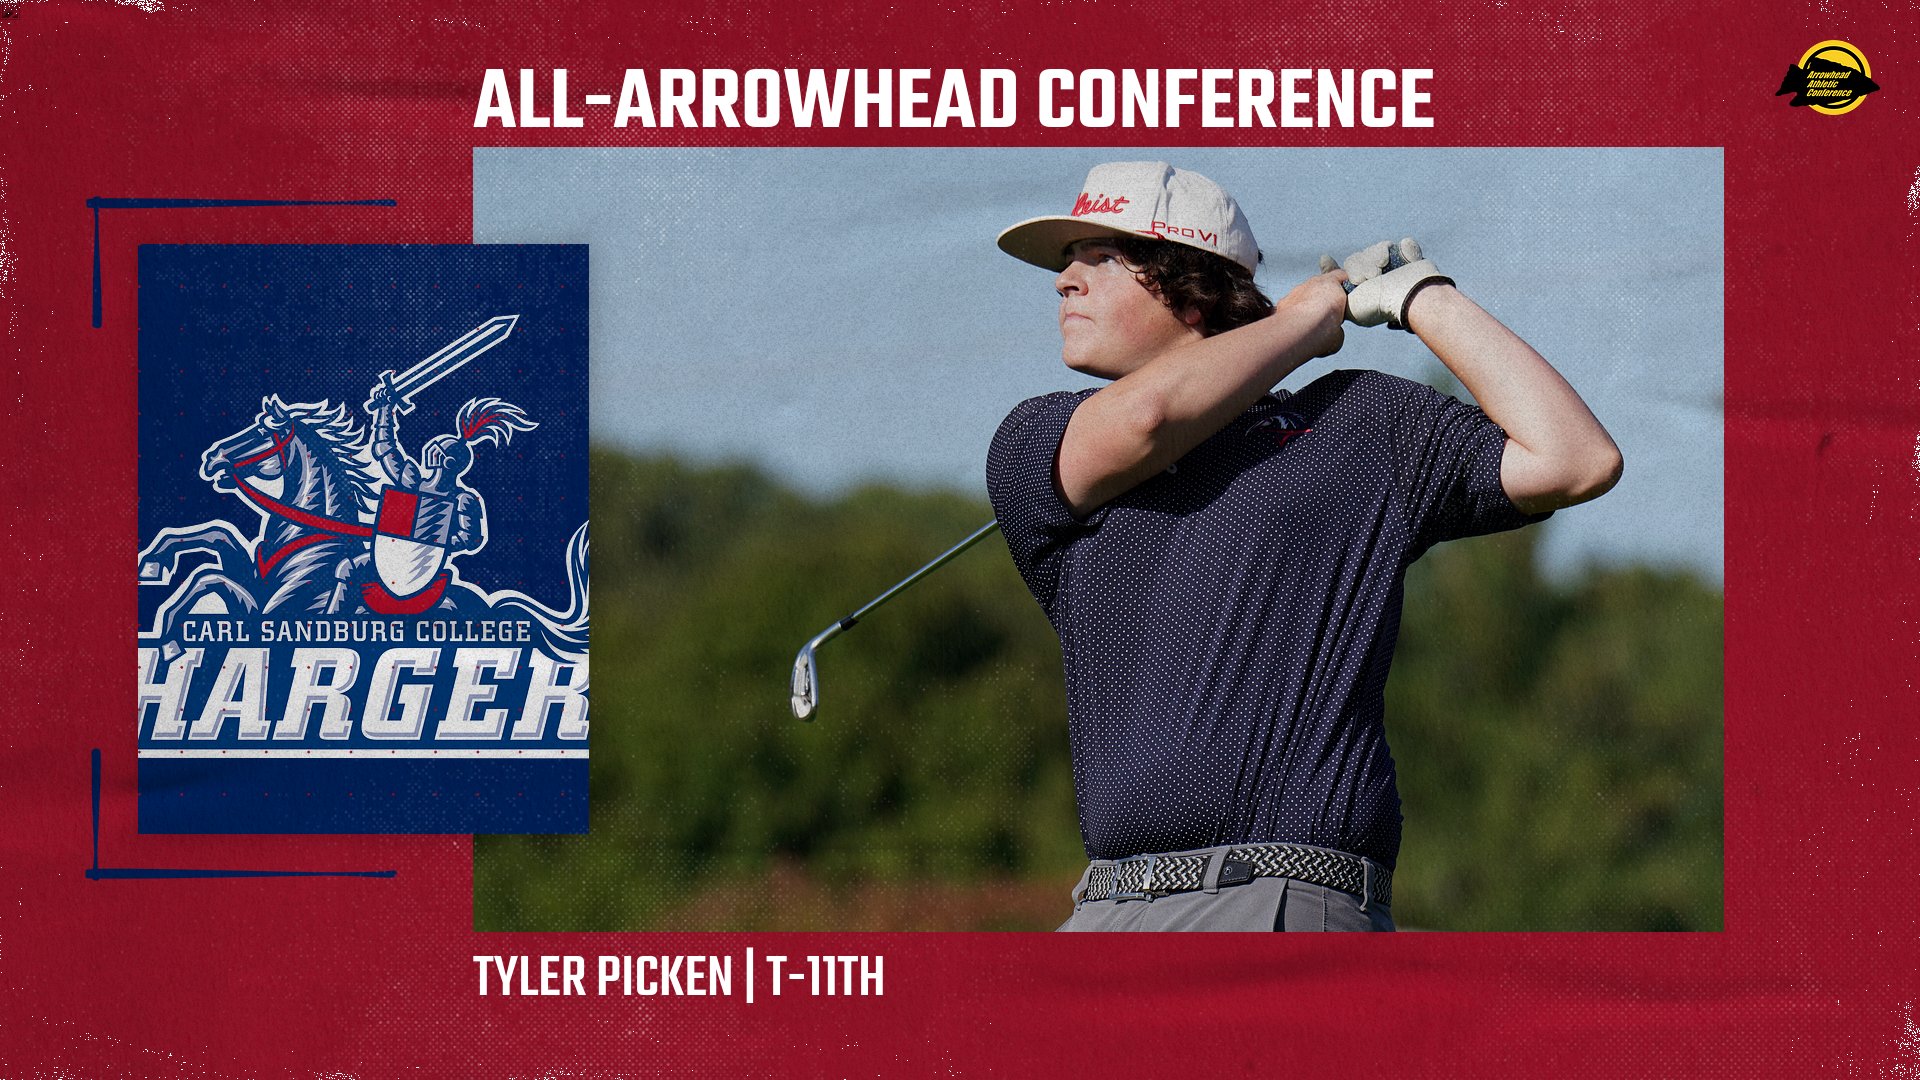 Chargers Men’s Golfer Picken Earns Spot on All-Arrowhead Conference Team